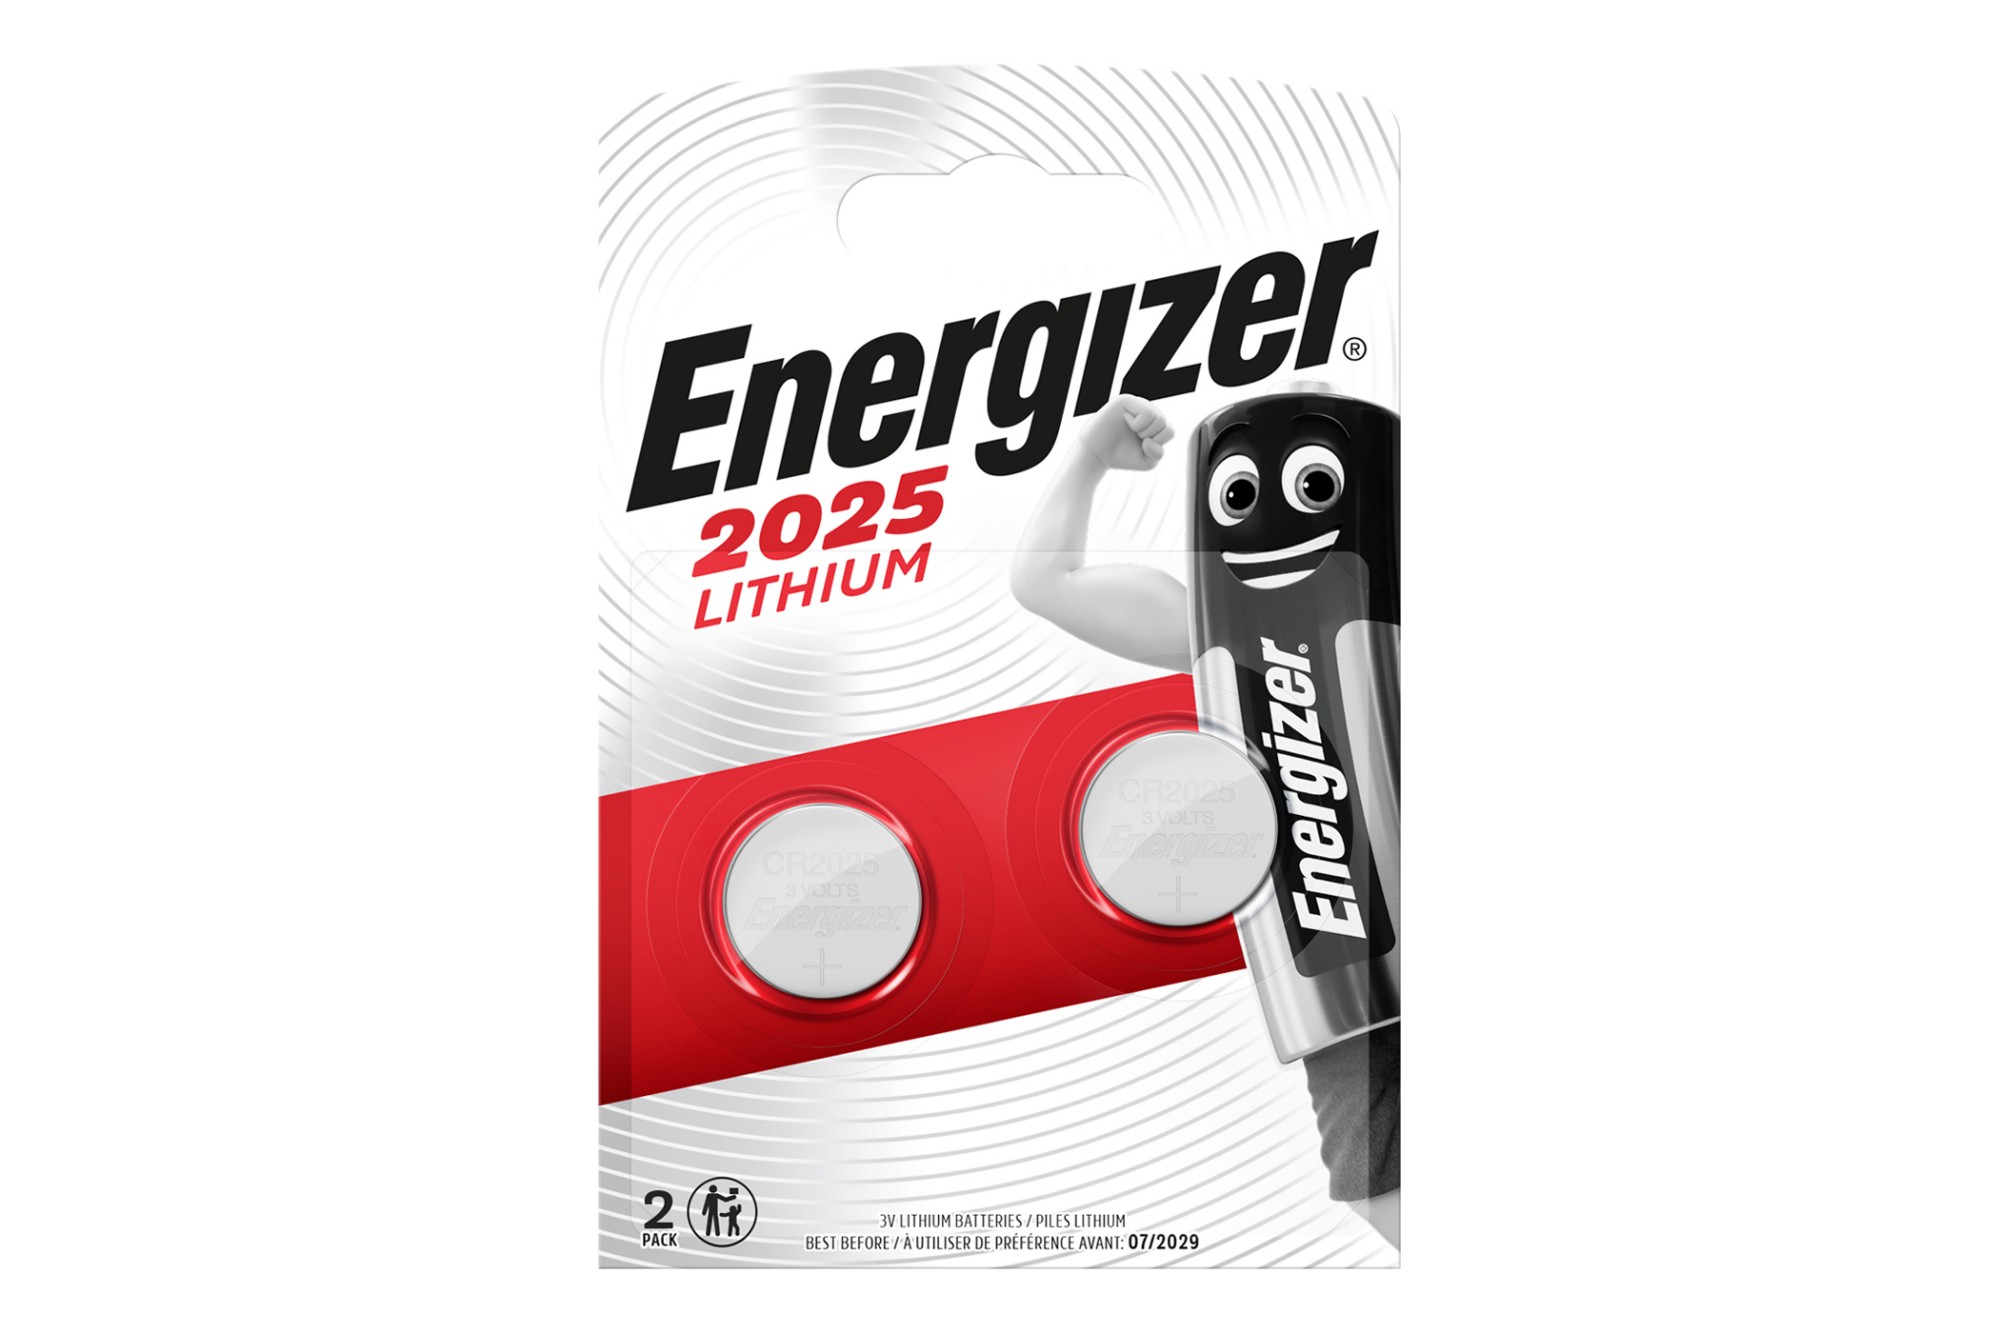 E300788900 ENERGIZER CR2025 Lithium Coin Cell Batteries - Pack of 2